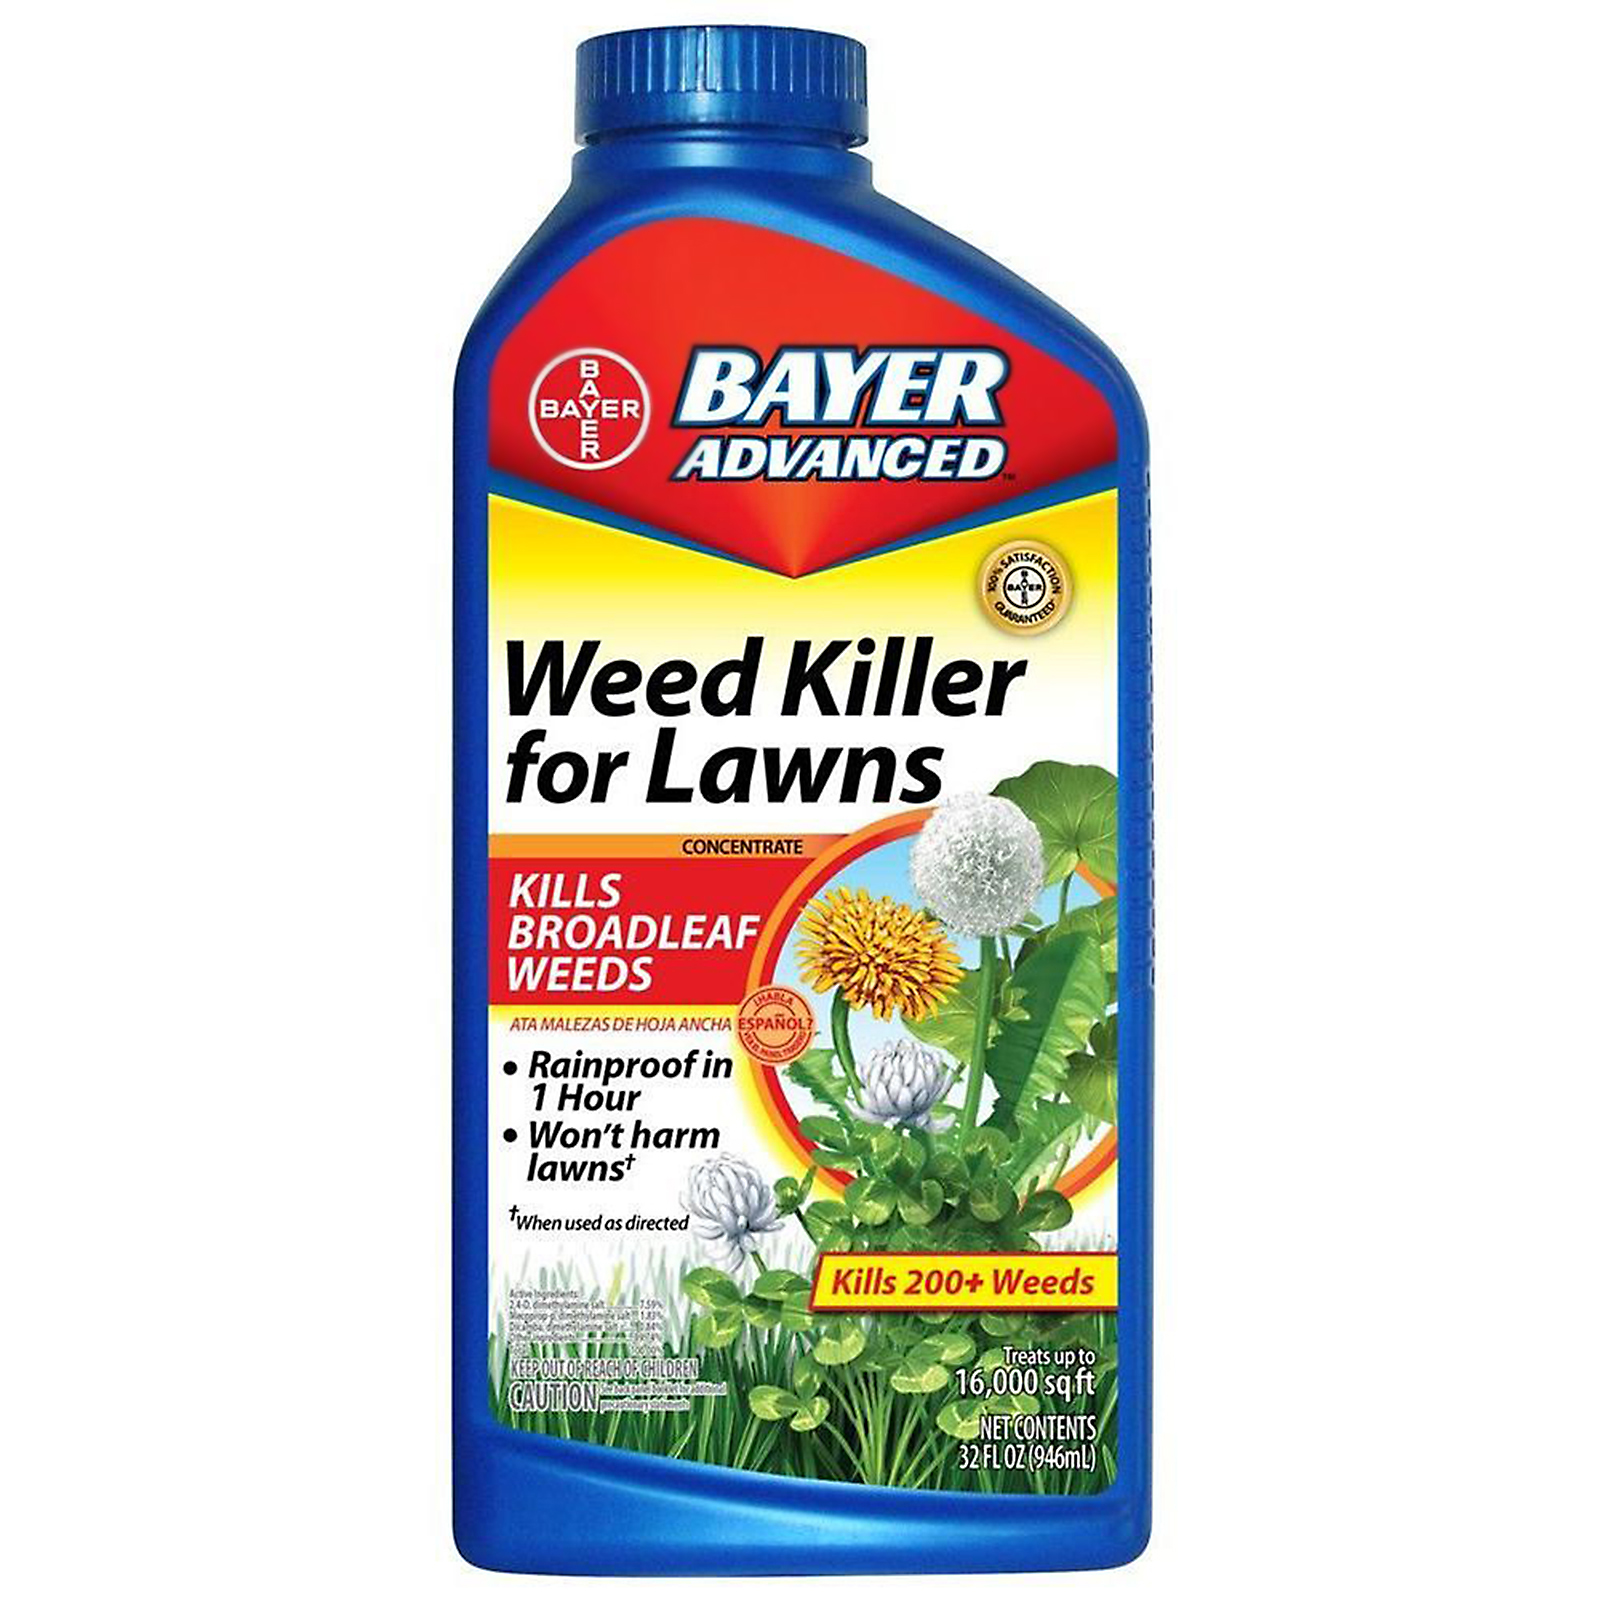 bayer-advanced-weed-killer-concentrate-for-lawns-32-oz-lawn-garden